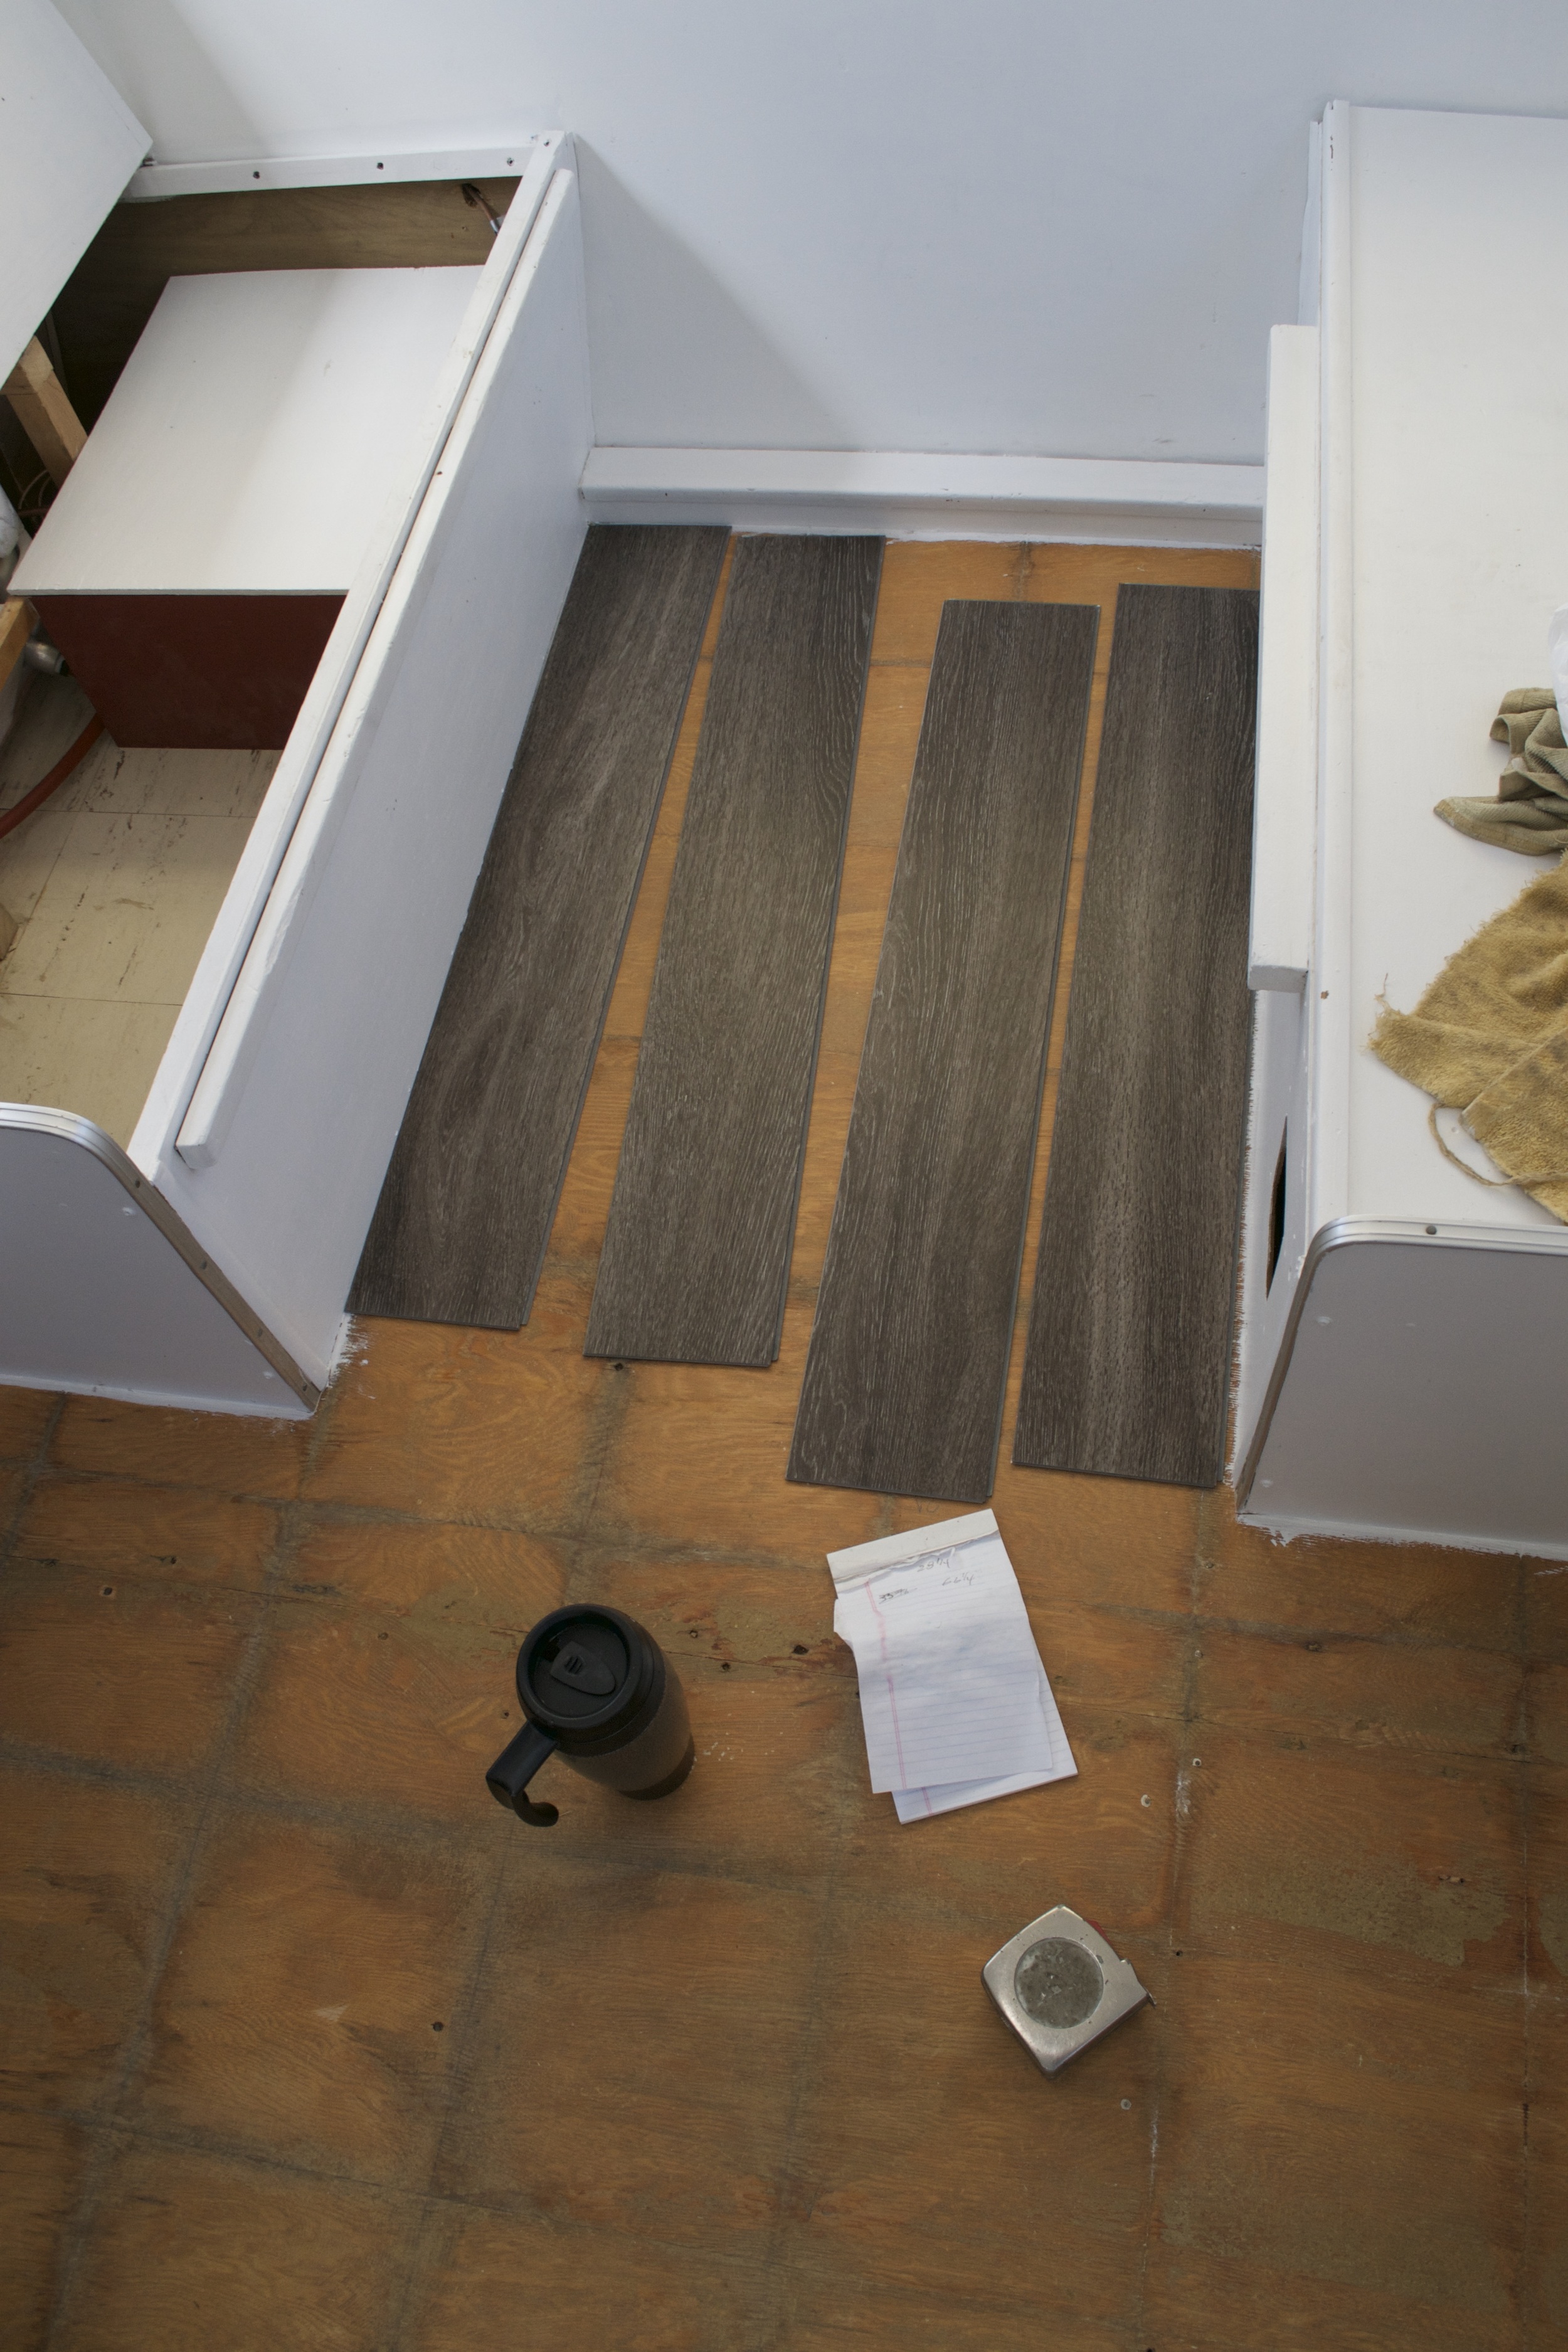 Reasons To Install Vinyl Plank Flooring, How To Measure Install Vinyl Plank Flooring